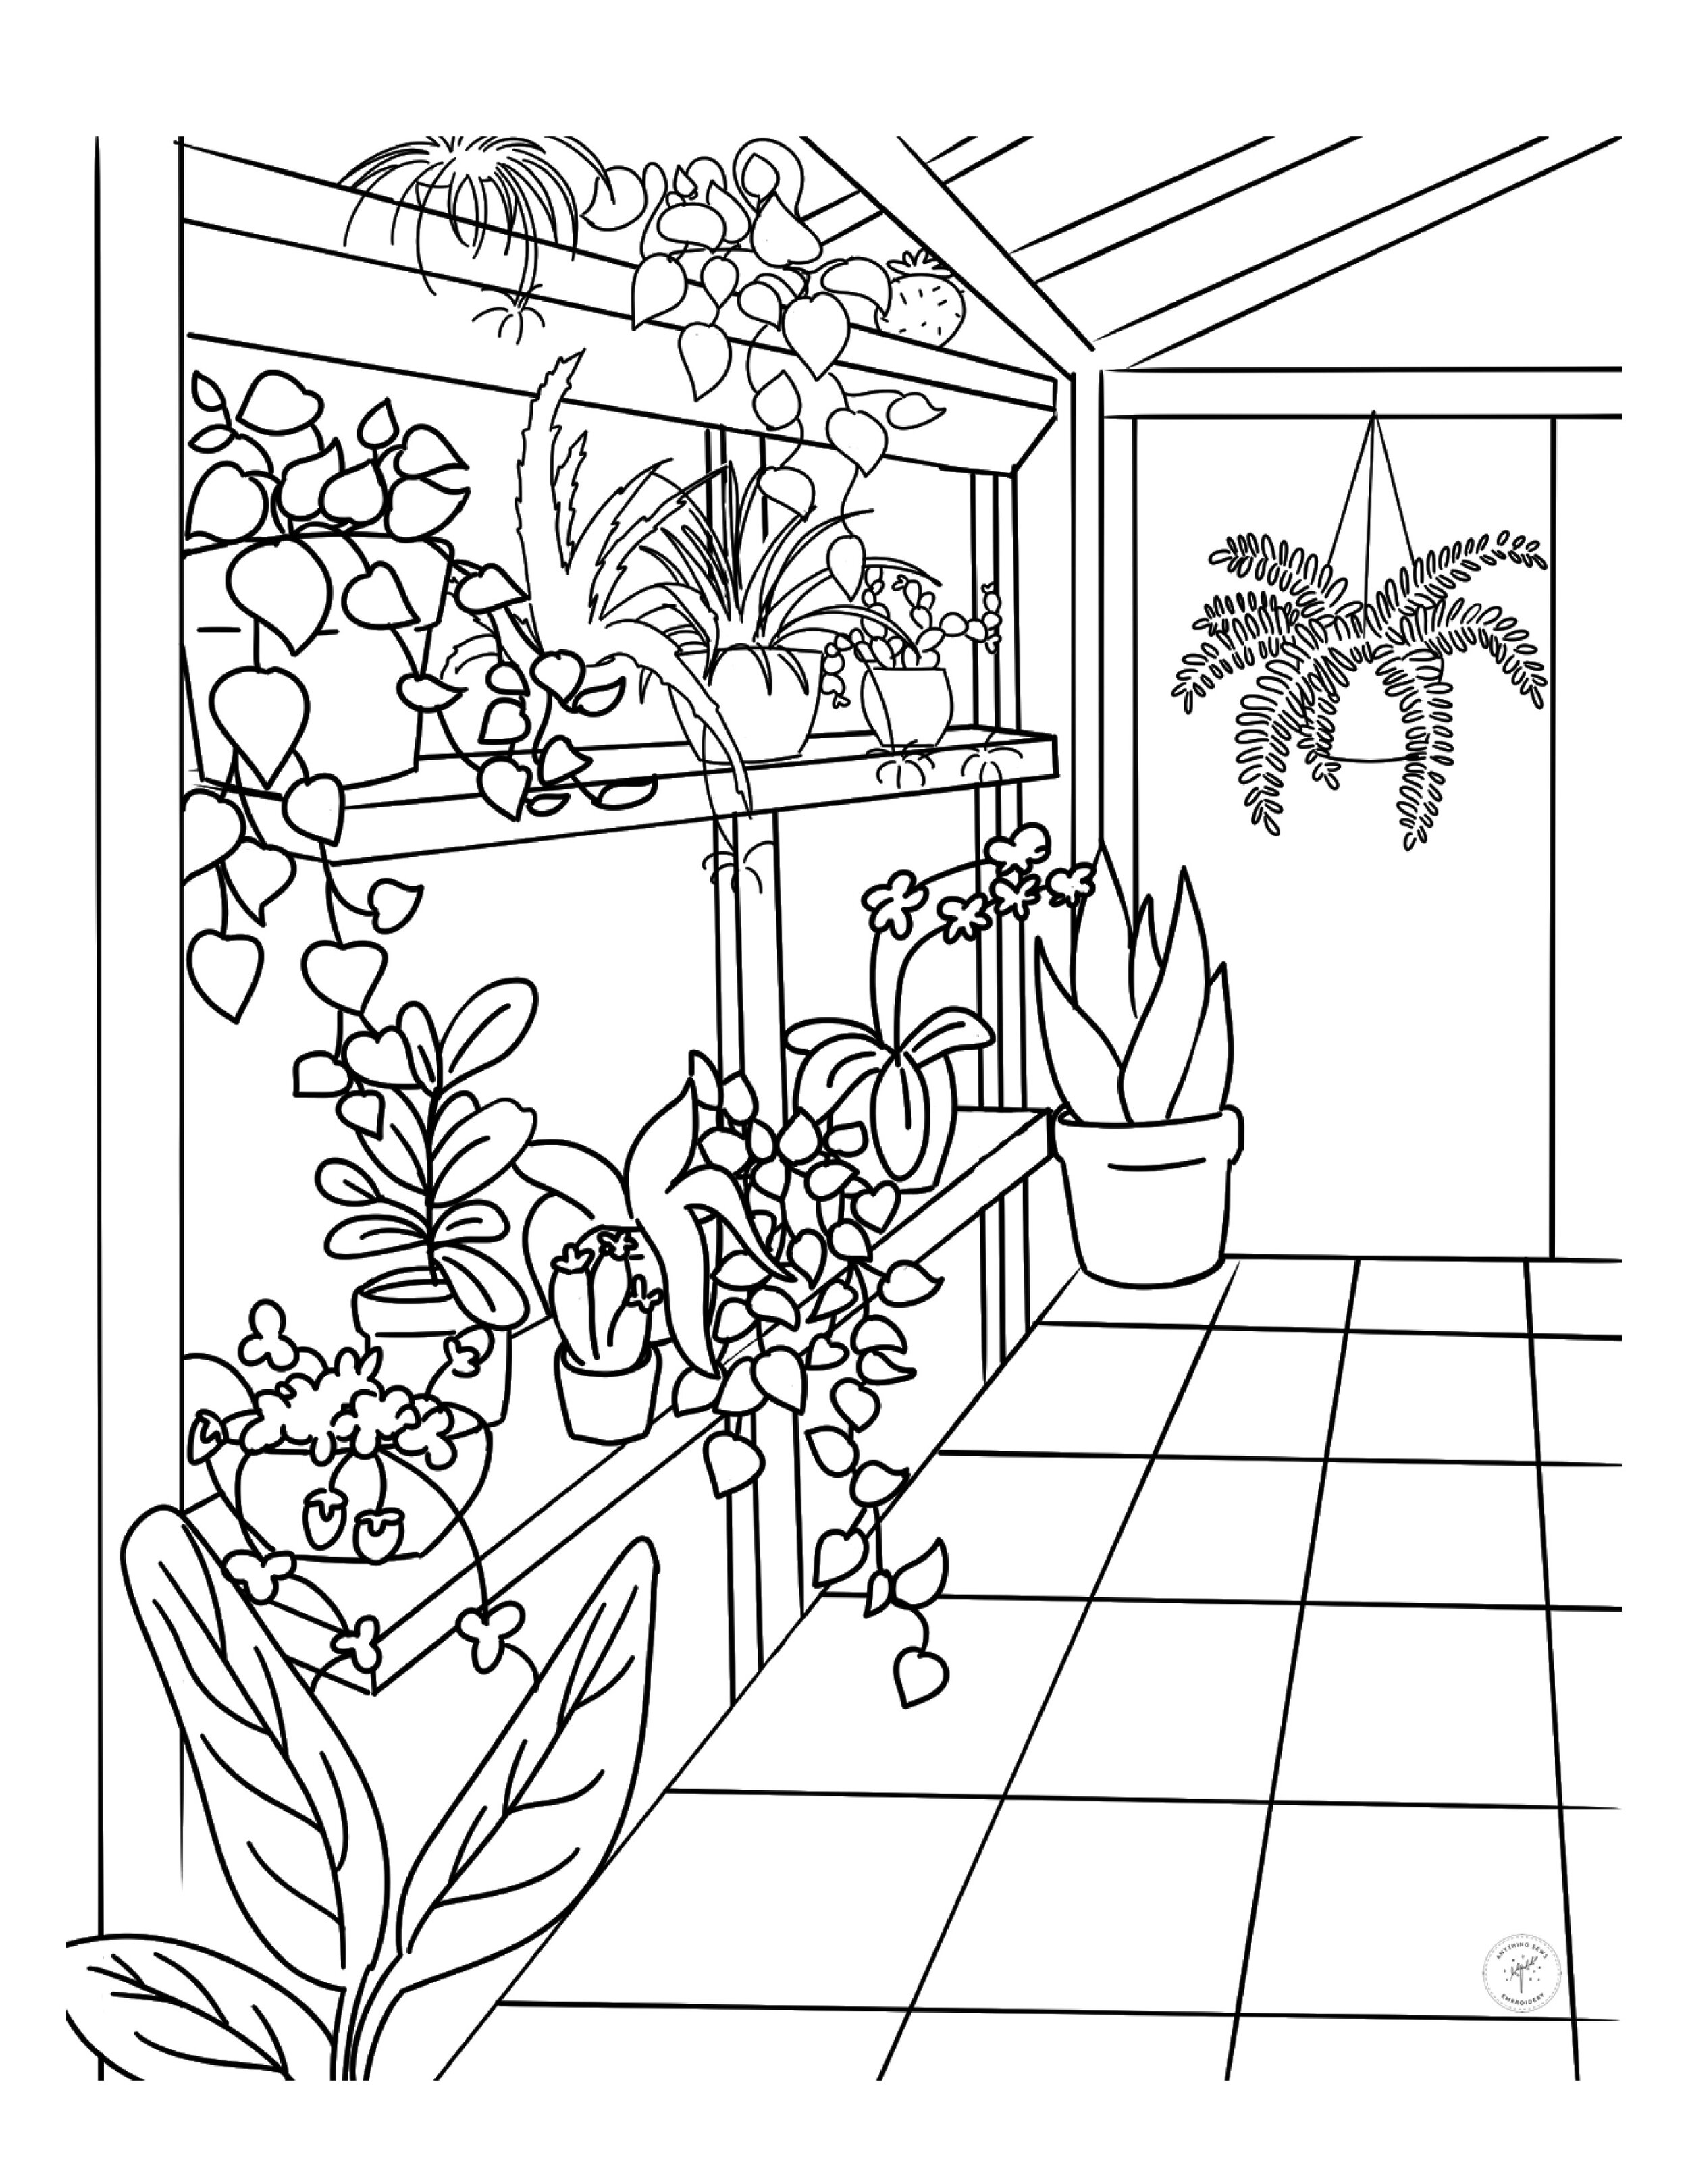 https://images.squarespace-cdn.com/content/v1/5c75e21577b903683c86a531/1584826524987-WW38LYKN85WWW9IFF7VZ/Greenhouse+Coloring+Page+by+AnthingSews.jpg?format=2500w